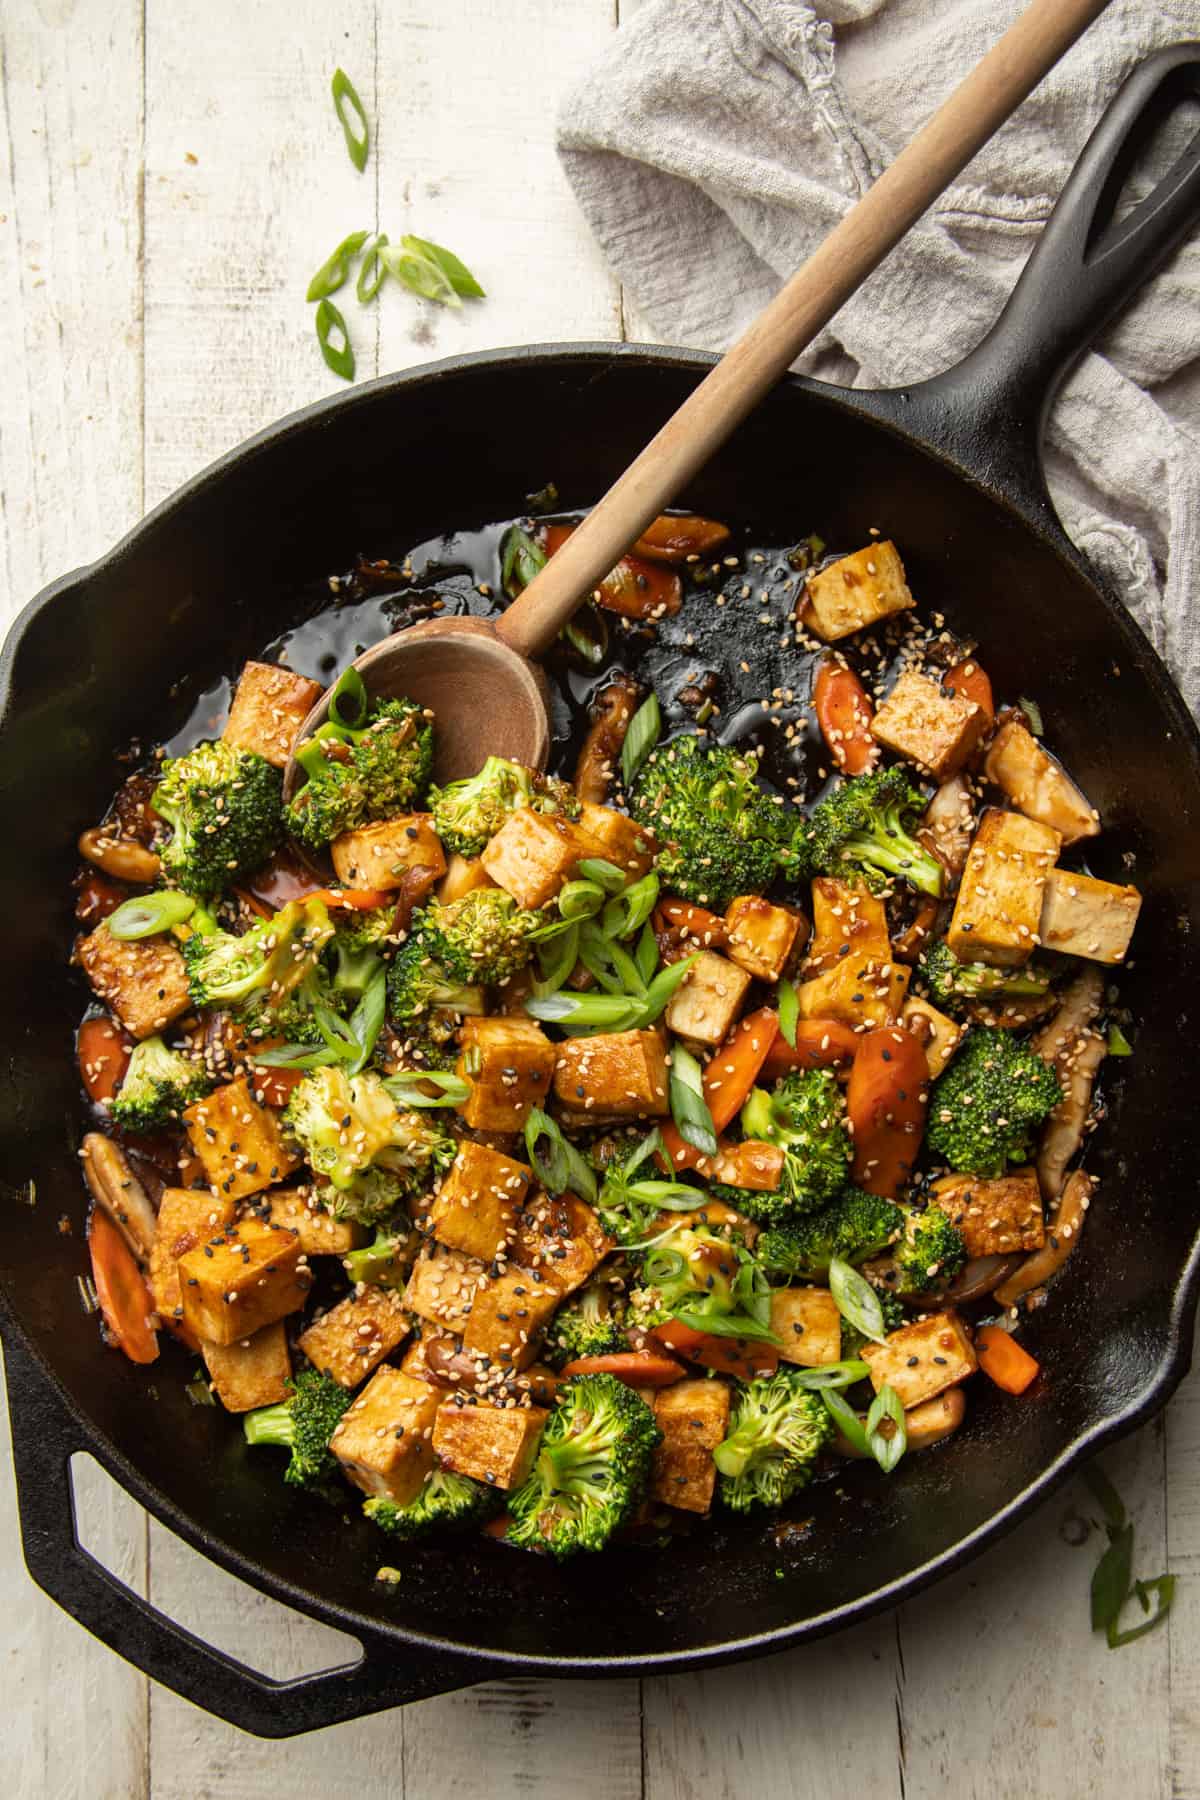 Skillet of Tofu Stir-Fry with wooden spoon on a white wooden surface.